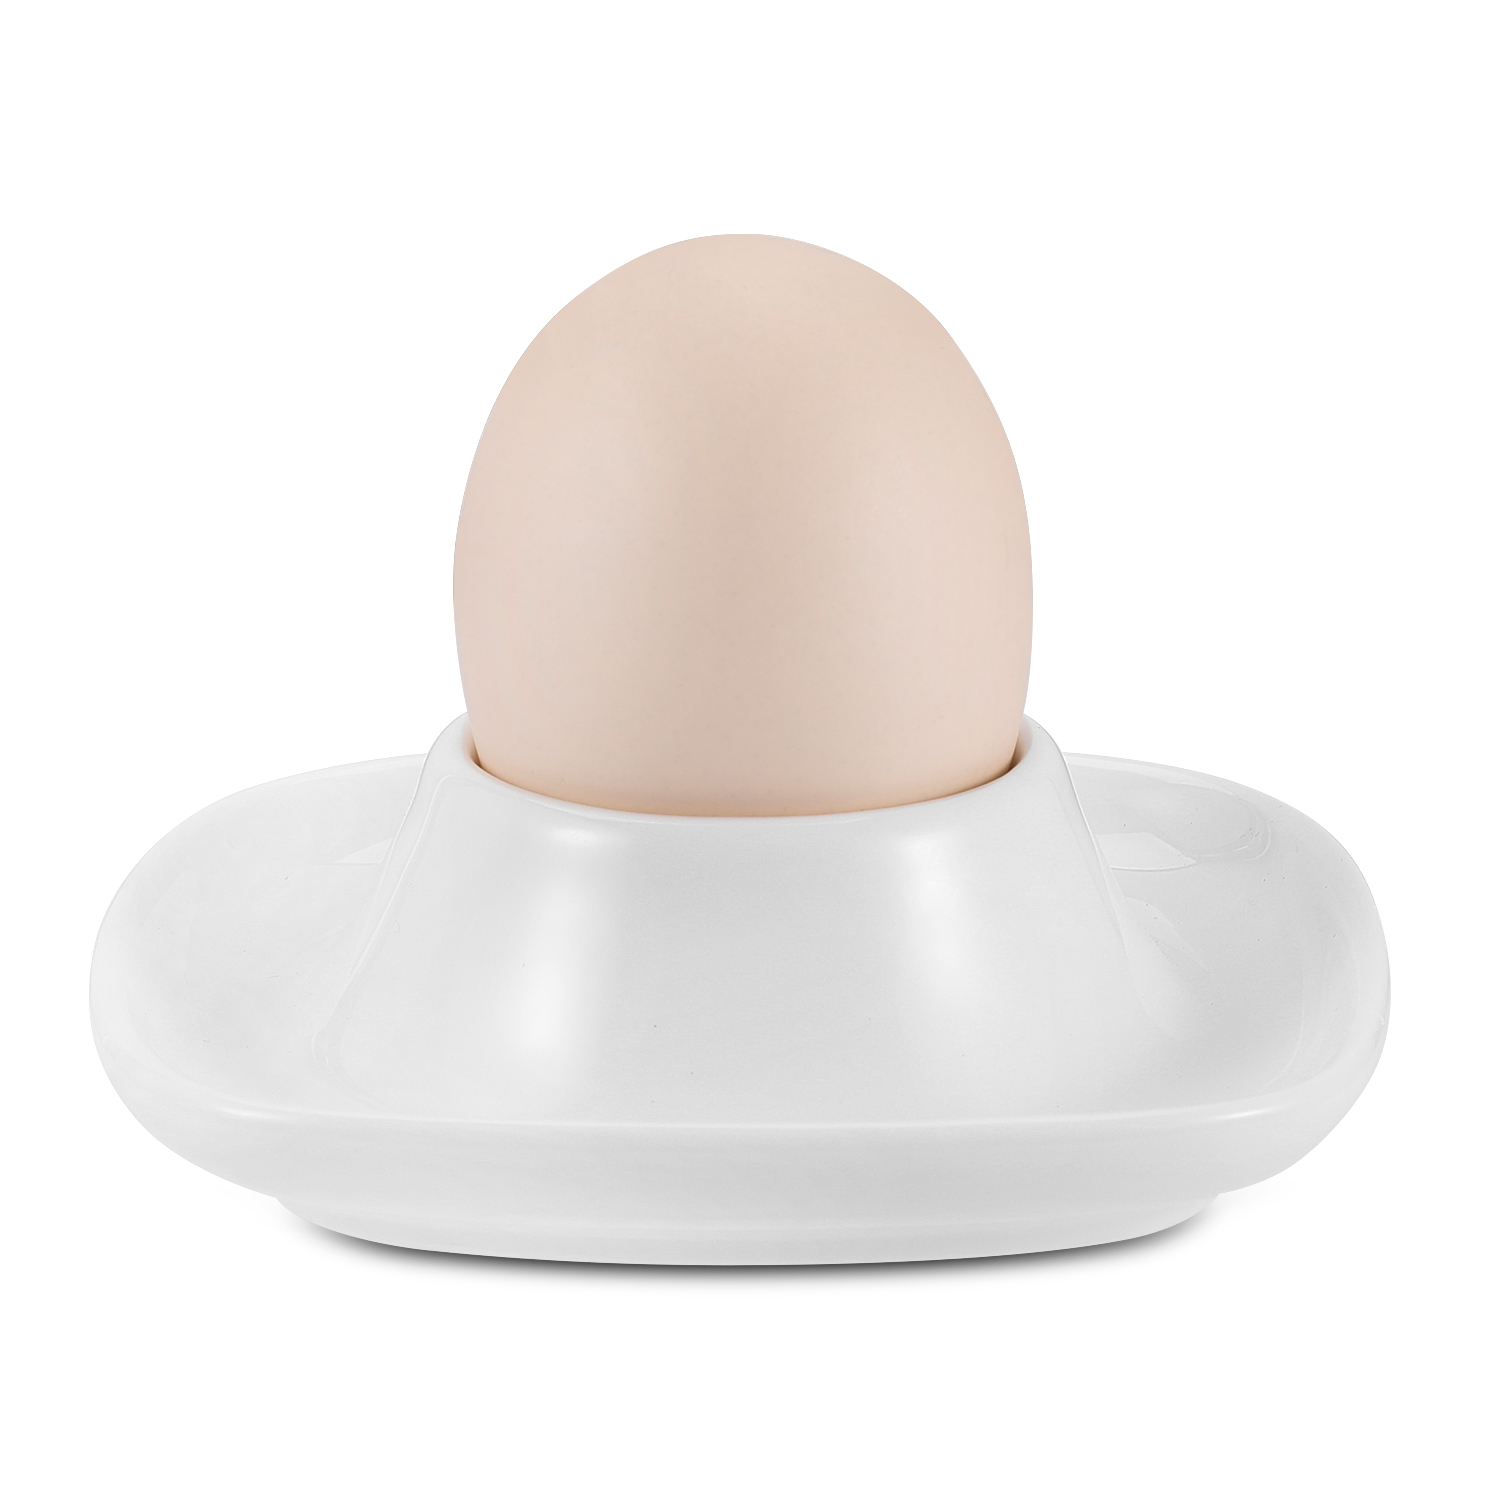 Ceramic Egg Cups Set of 4 Pack, Porcelain Hard Soft Boiled Egg Holder Keeper Container w/ Base, Stackable Serving Dish Plate Stand Serveware for Countertop Display Kitchen (White) - image 3 of 7